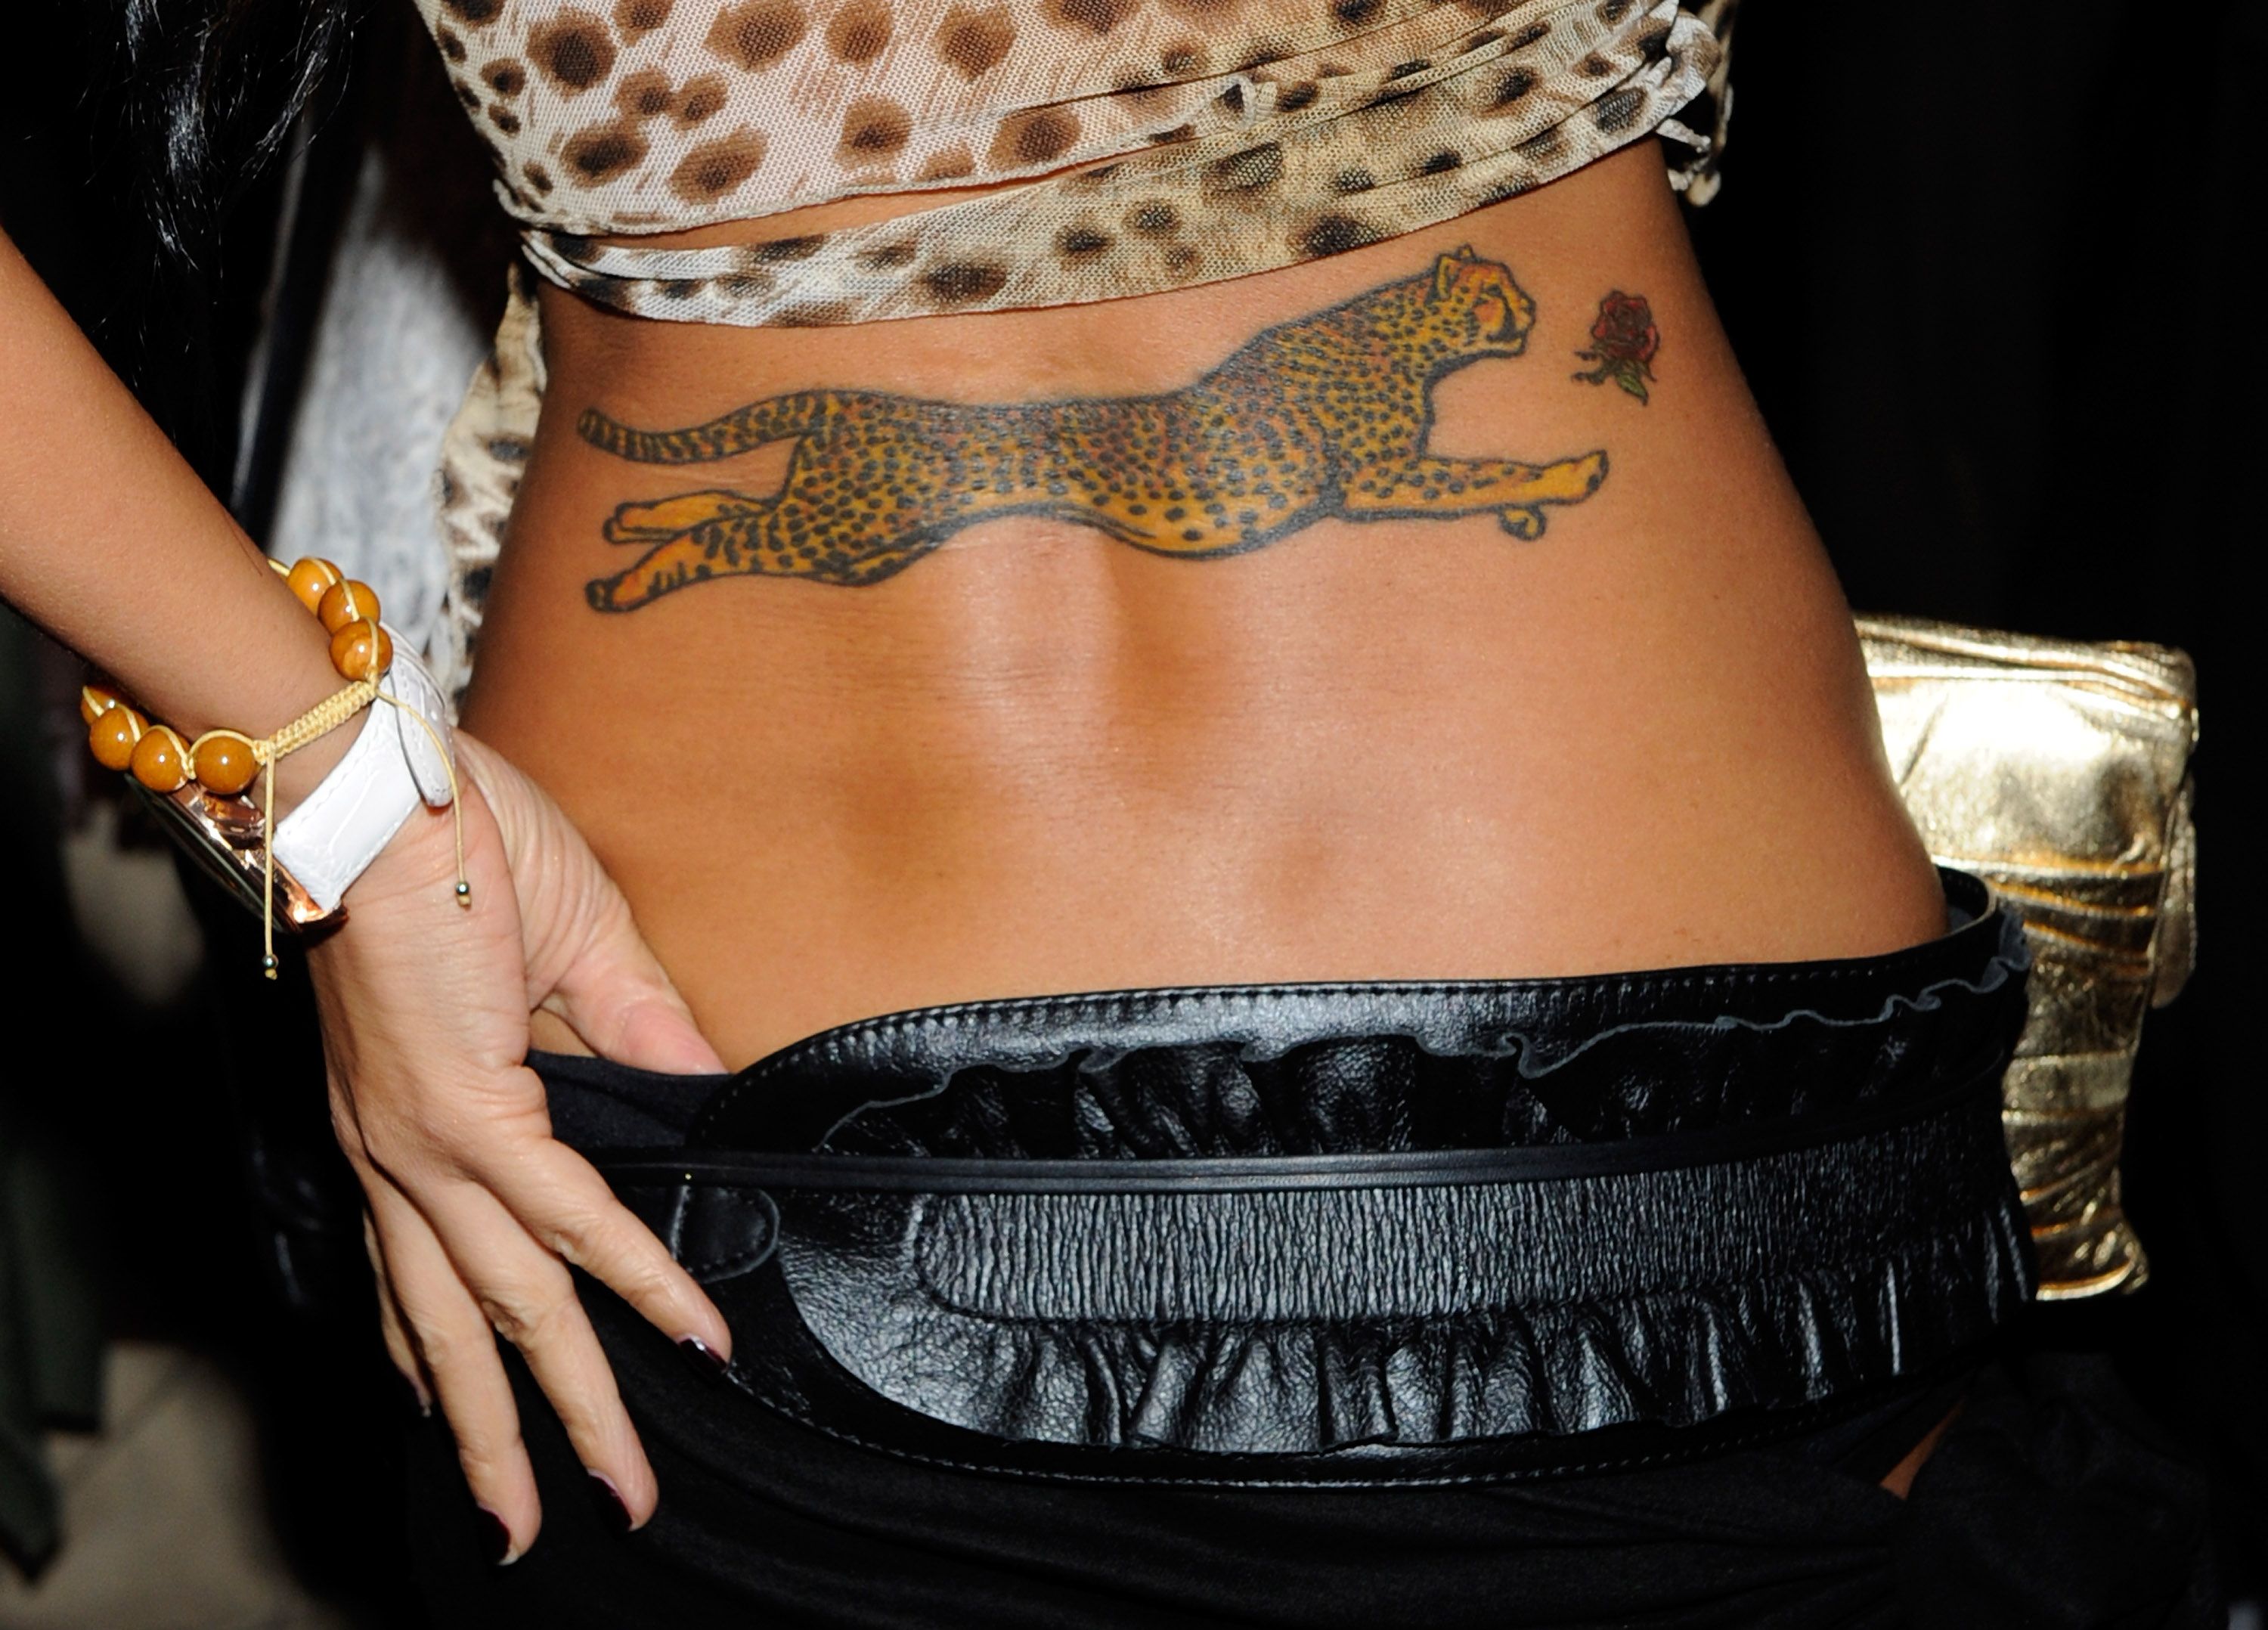 Lower-Back Tattoos Are Back, With Low-Rise Jeans and Y2K